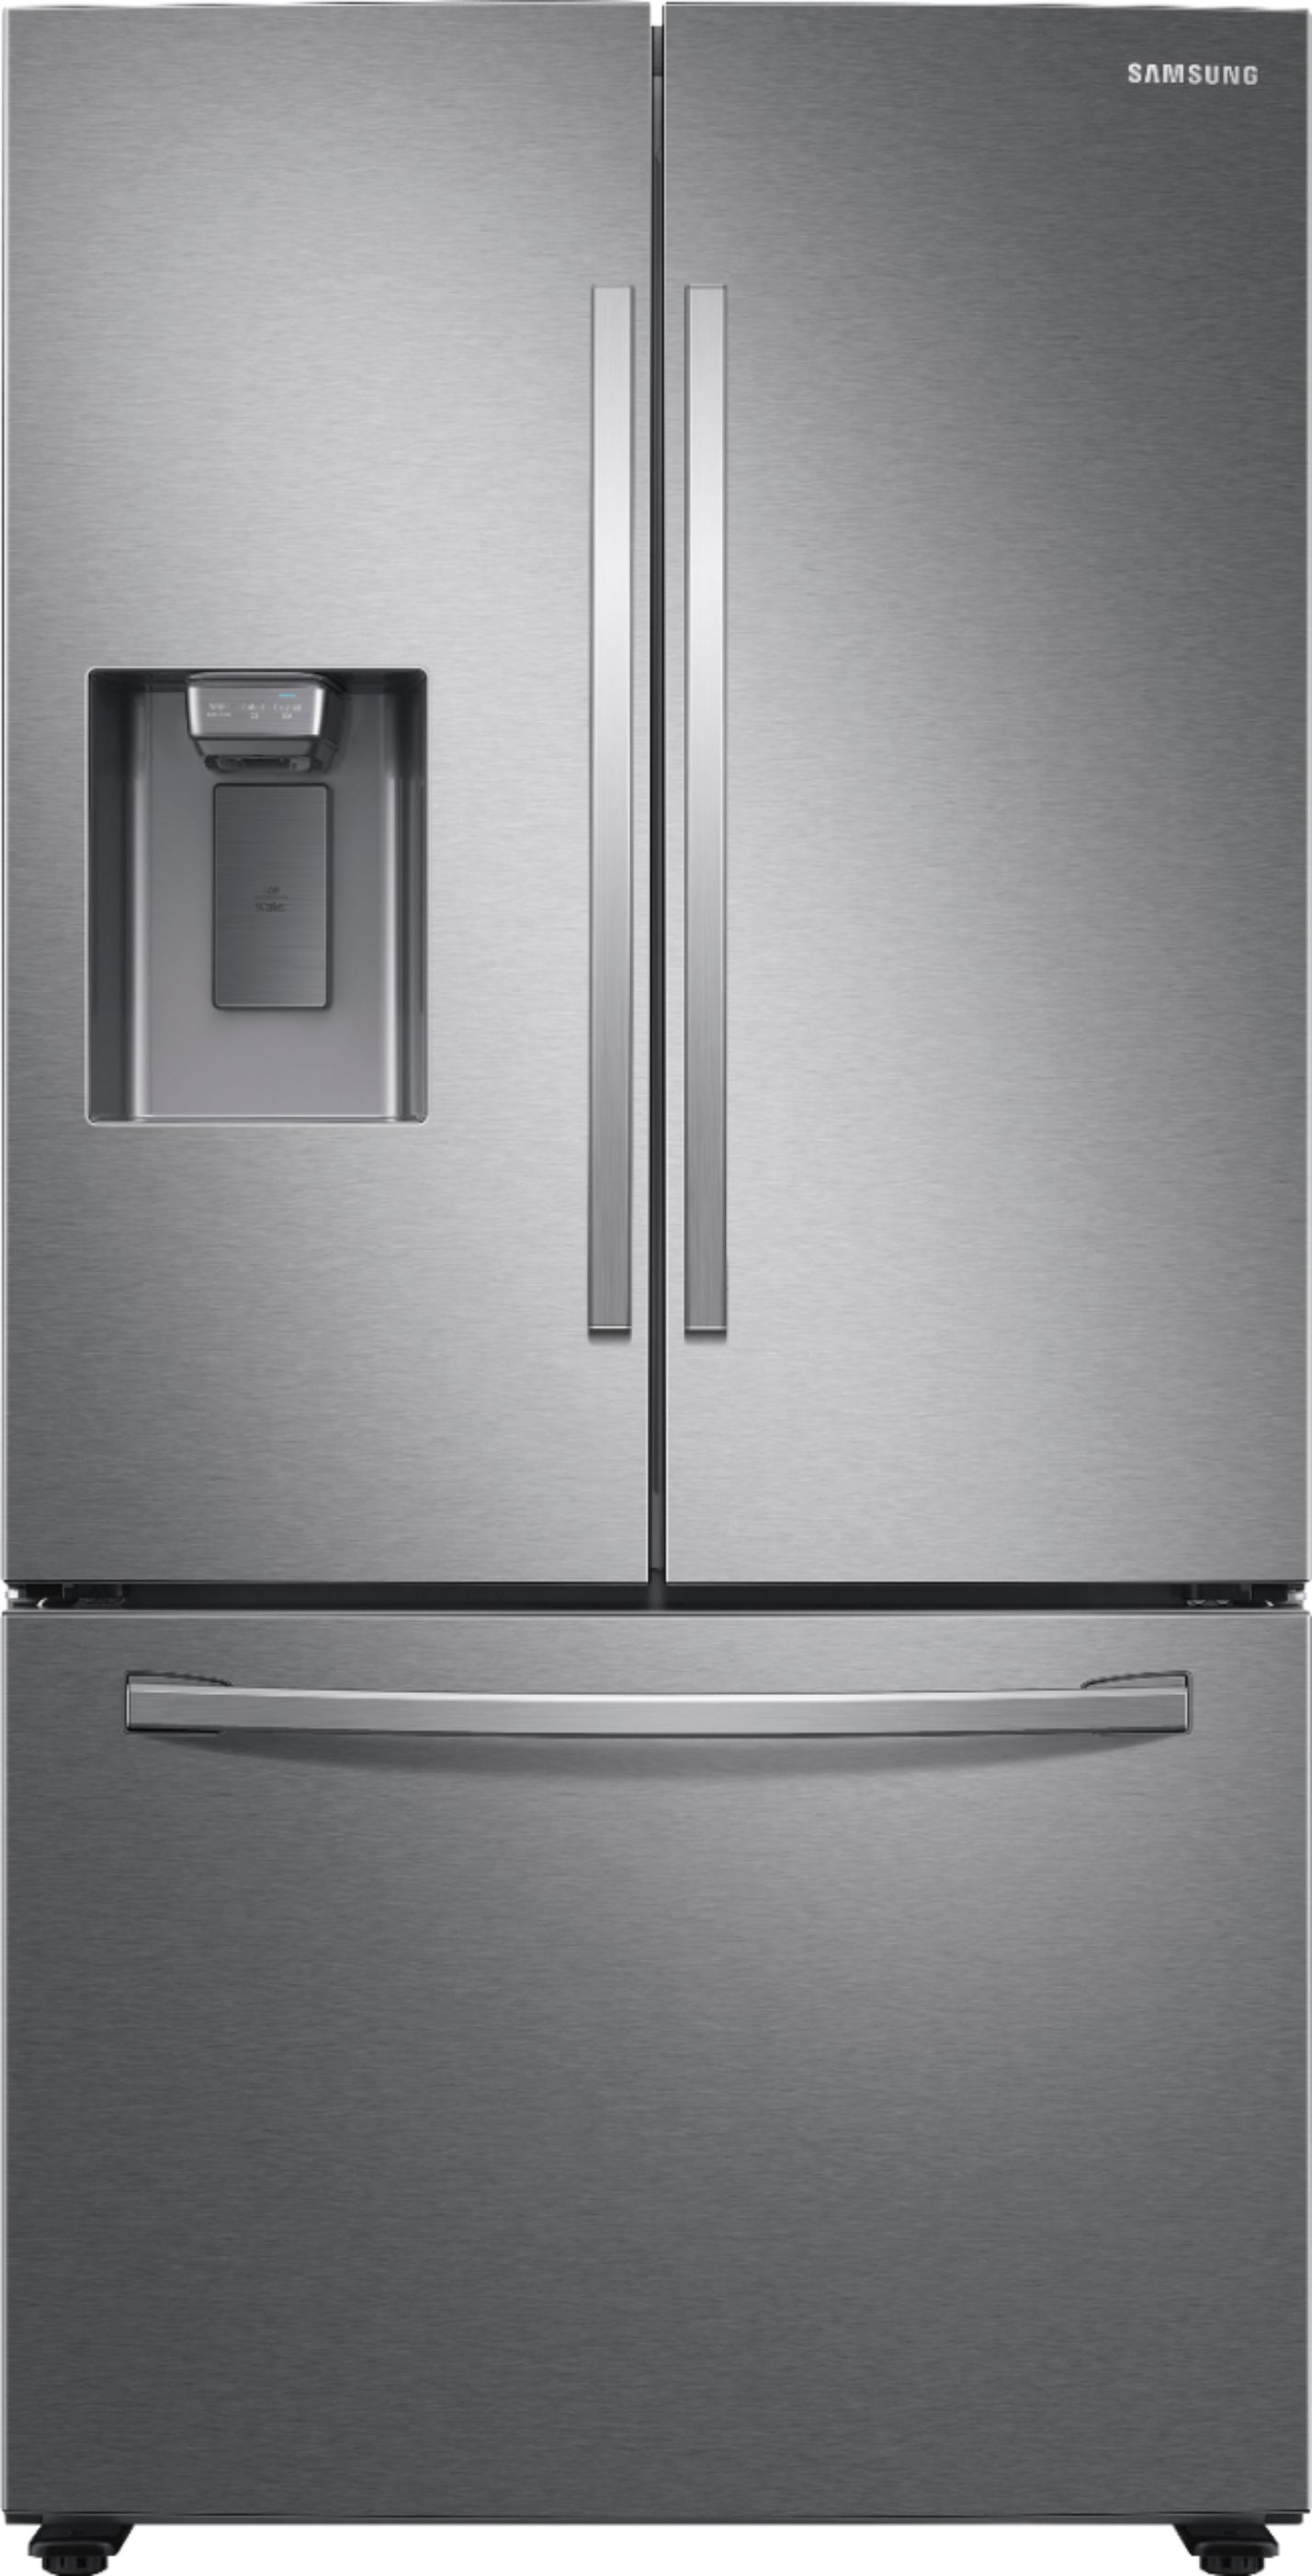 Insignia™ 3.0 Cu. Ft. Mini Fridge with Top Freezer Stainless Steel  NS-CF30SS9 - Best Buy